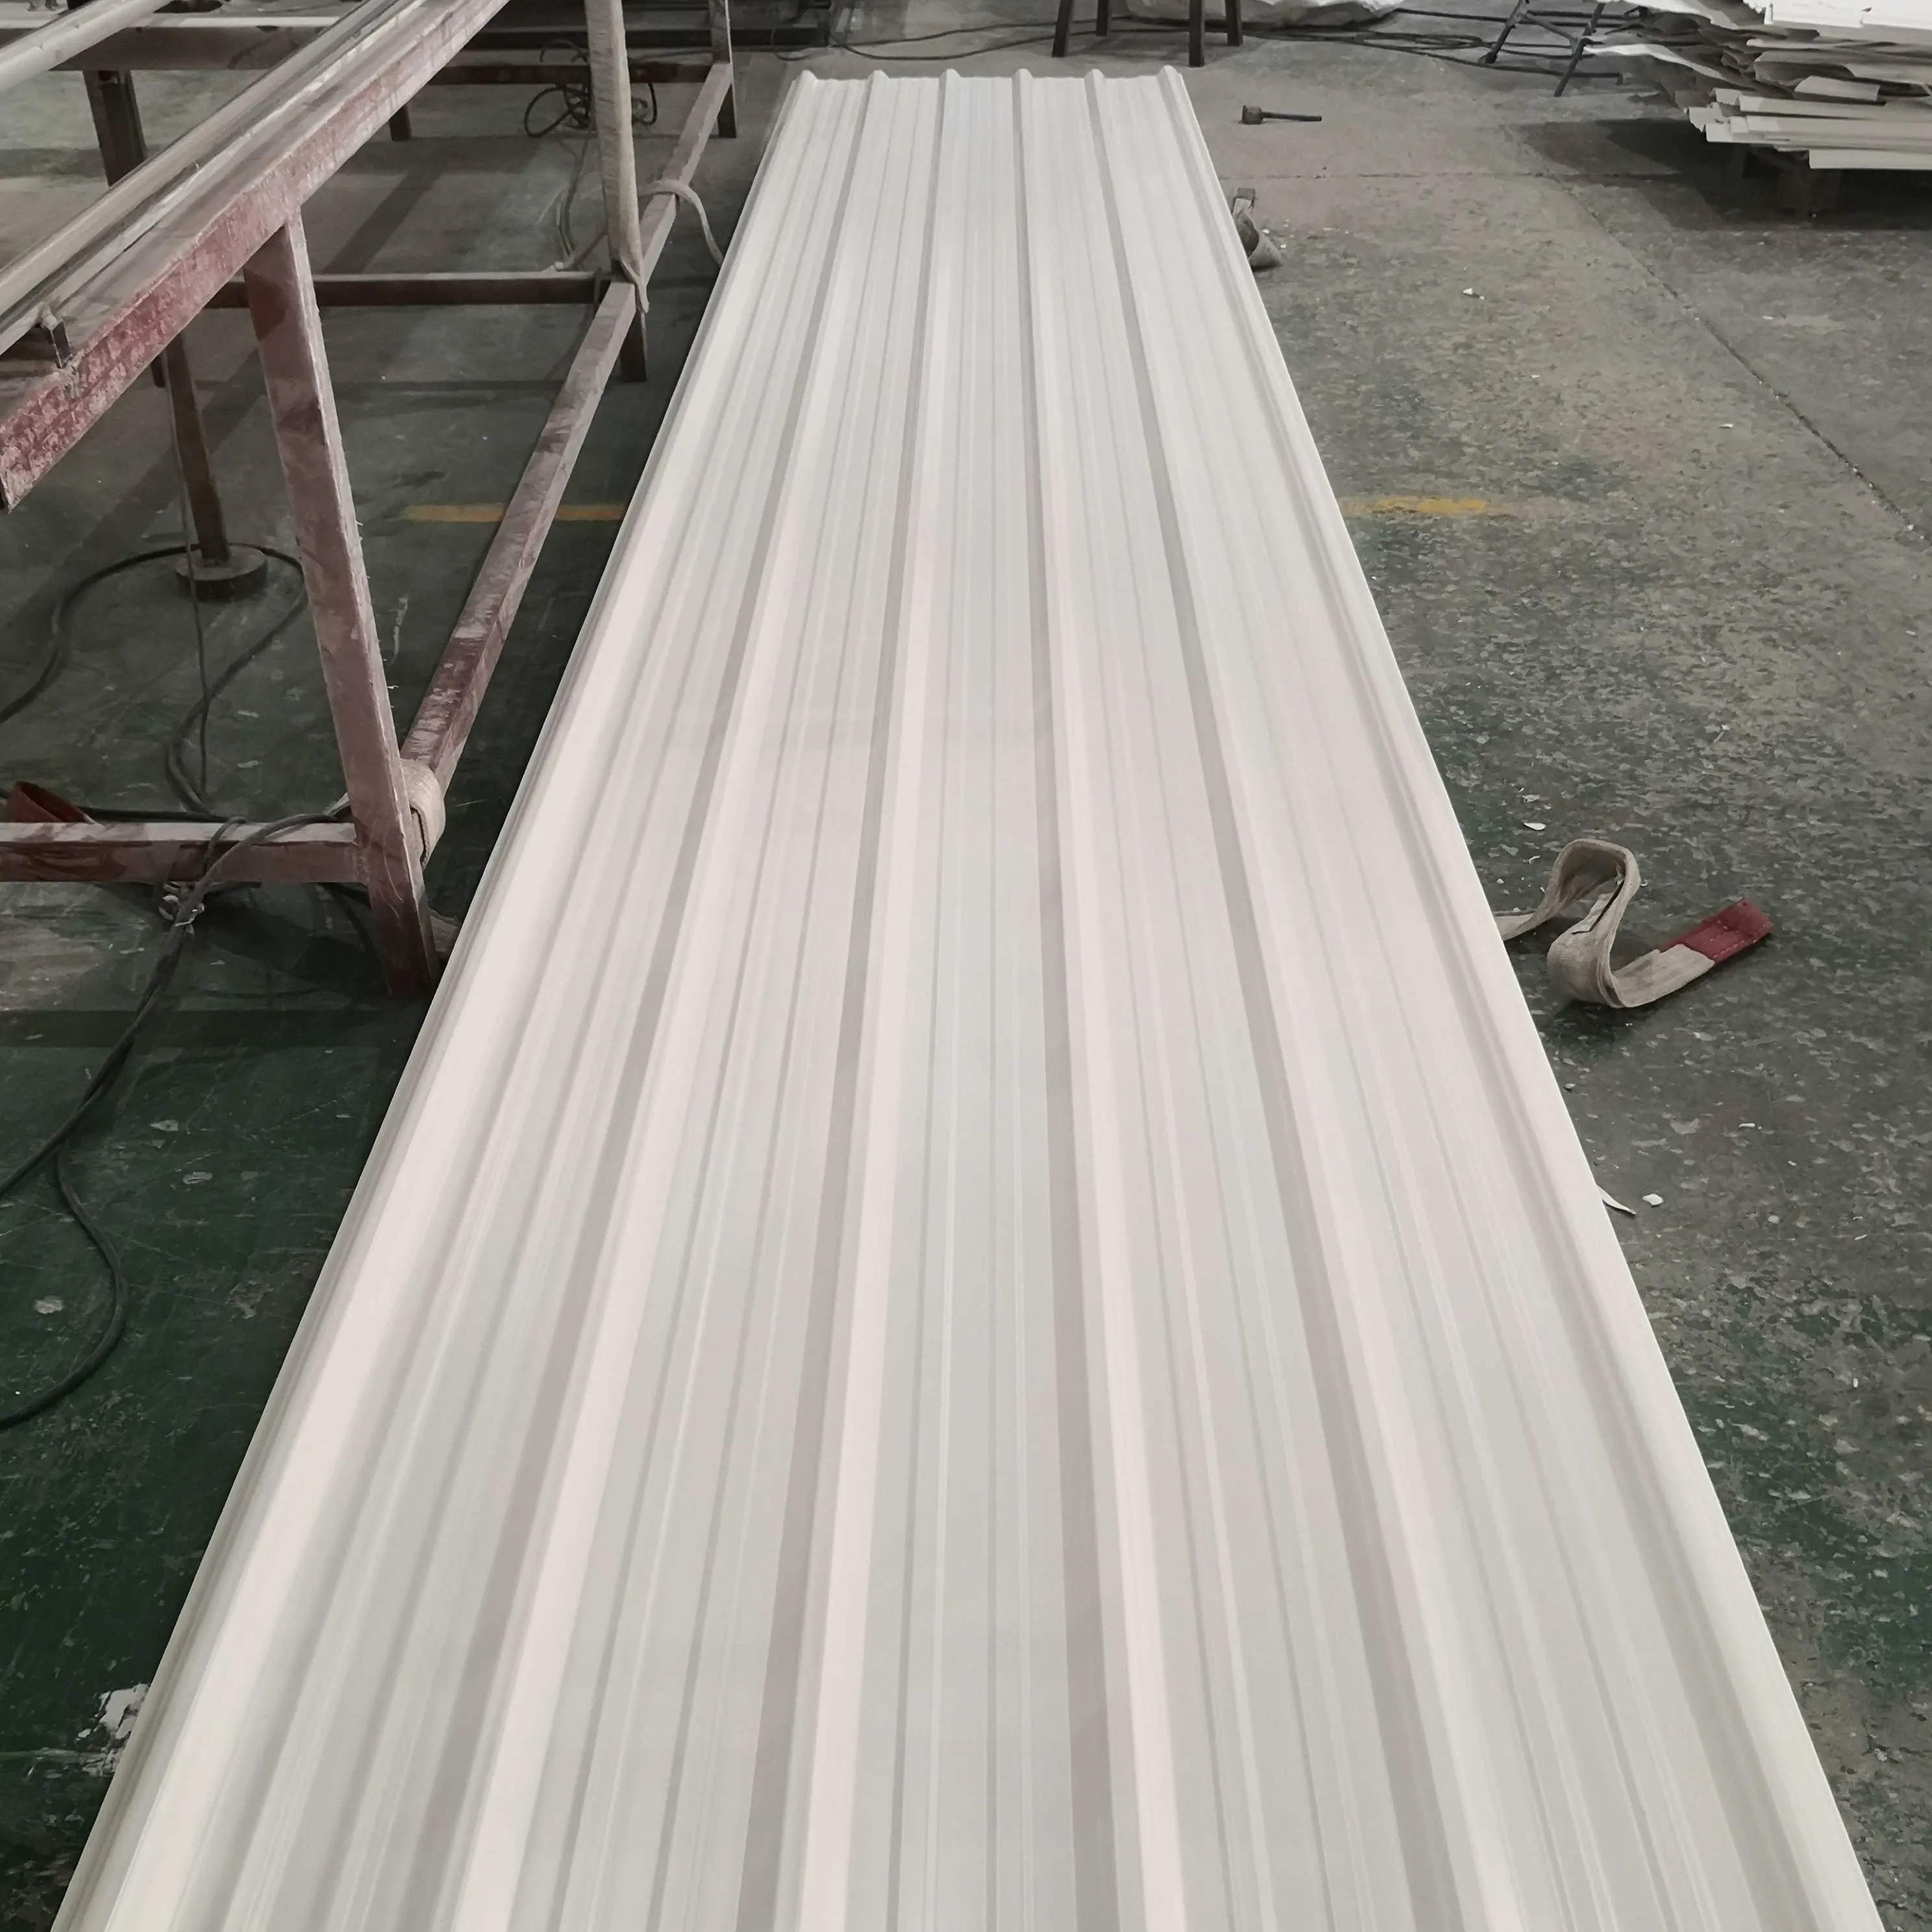 Insulated second hand corrugated roofing sheets from malaysia